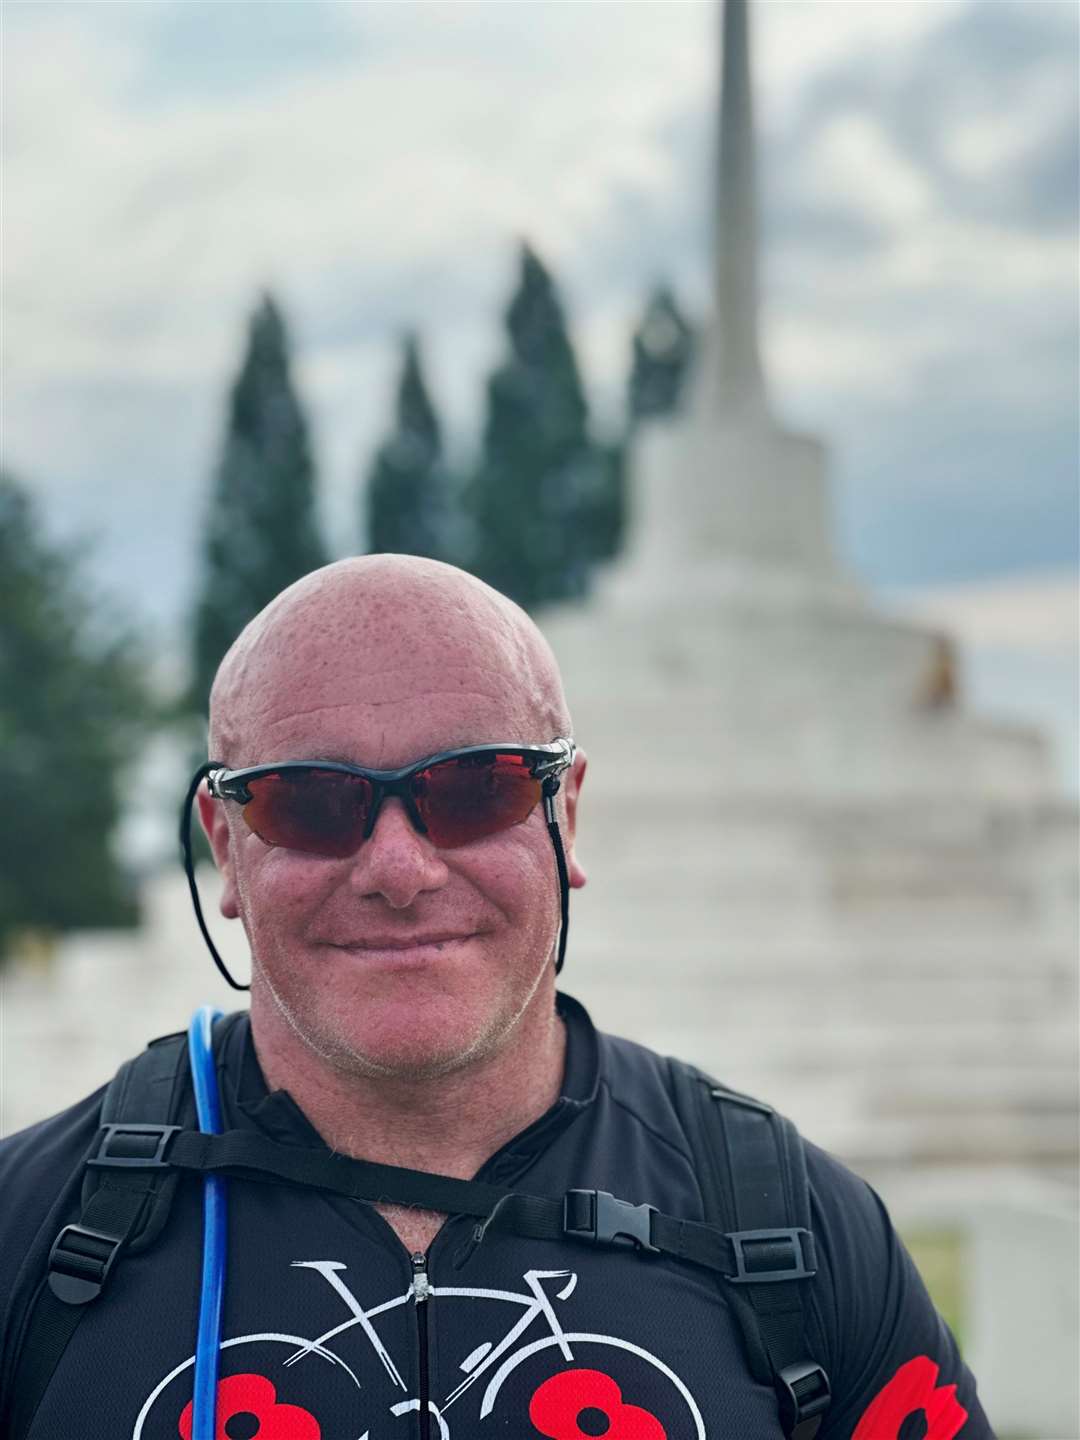 Kev during his three-day charity bike ride around WWI battlefield sites and cemeteries in France and Belgium last summer.